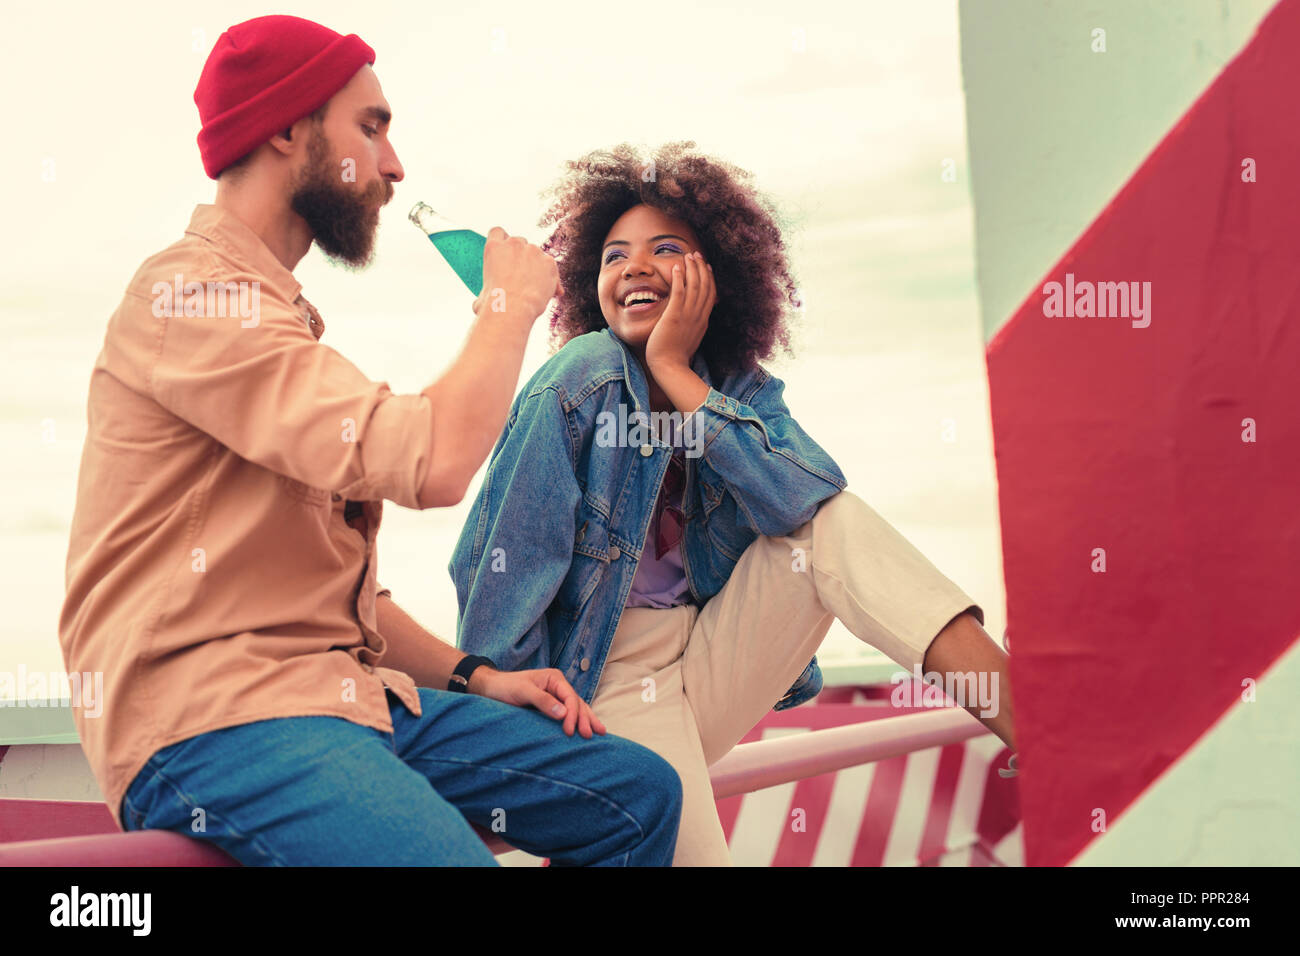 Young man drinking from bottle and girlfriend looking at him Stock Photo